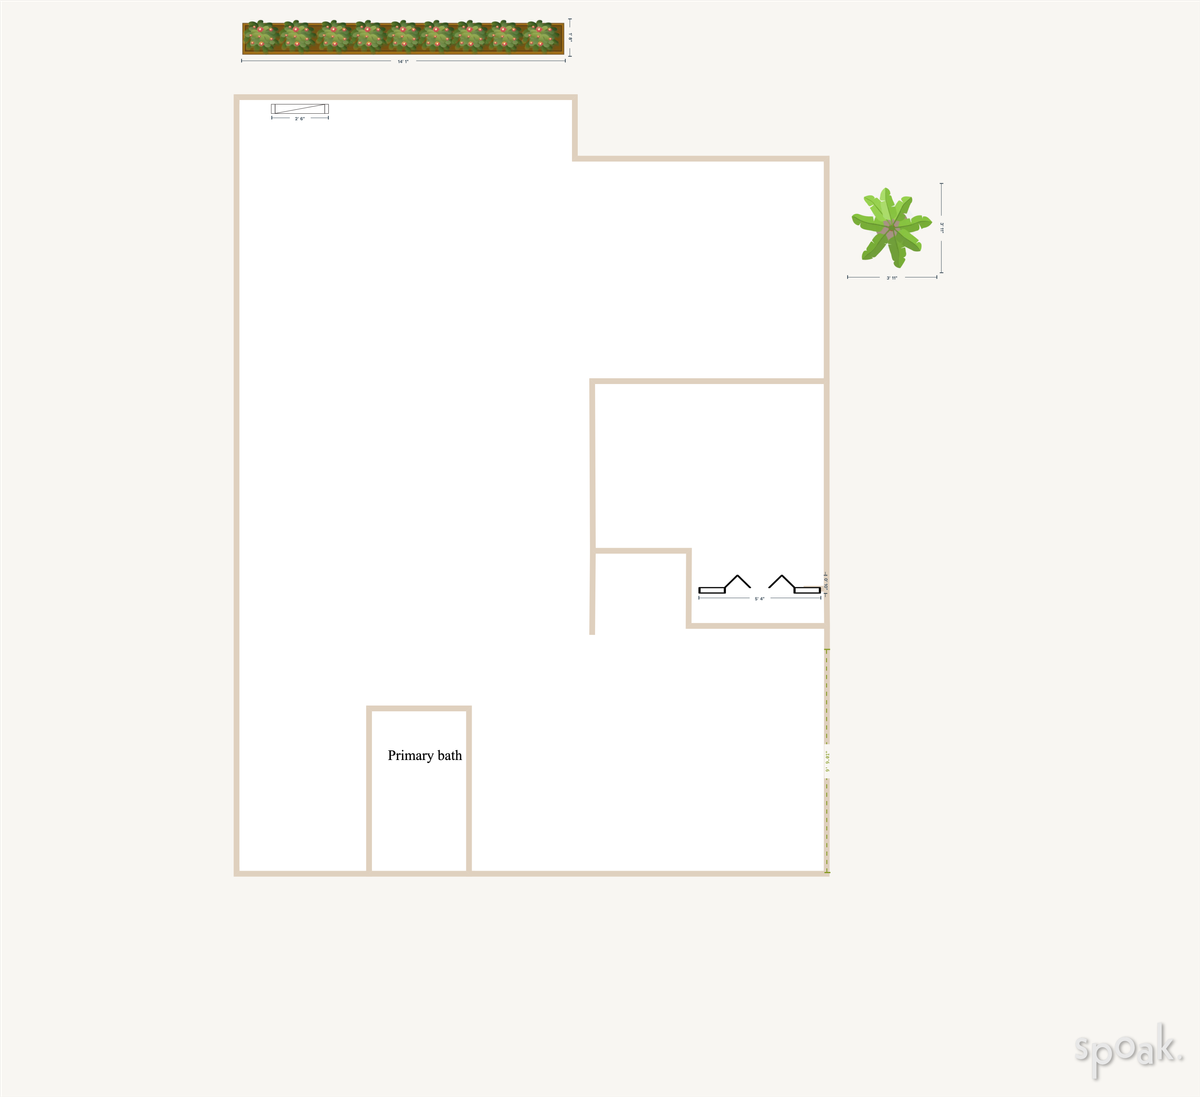 Three Bedroom House Layout designed by Amy Nielsen